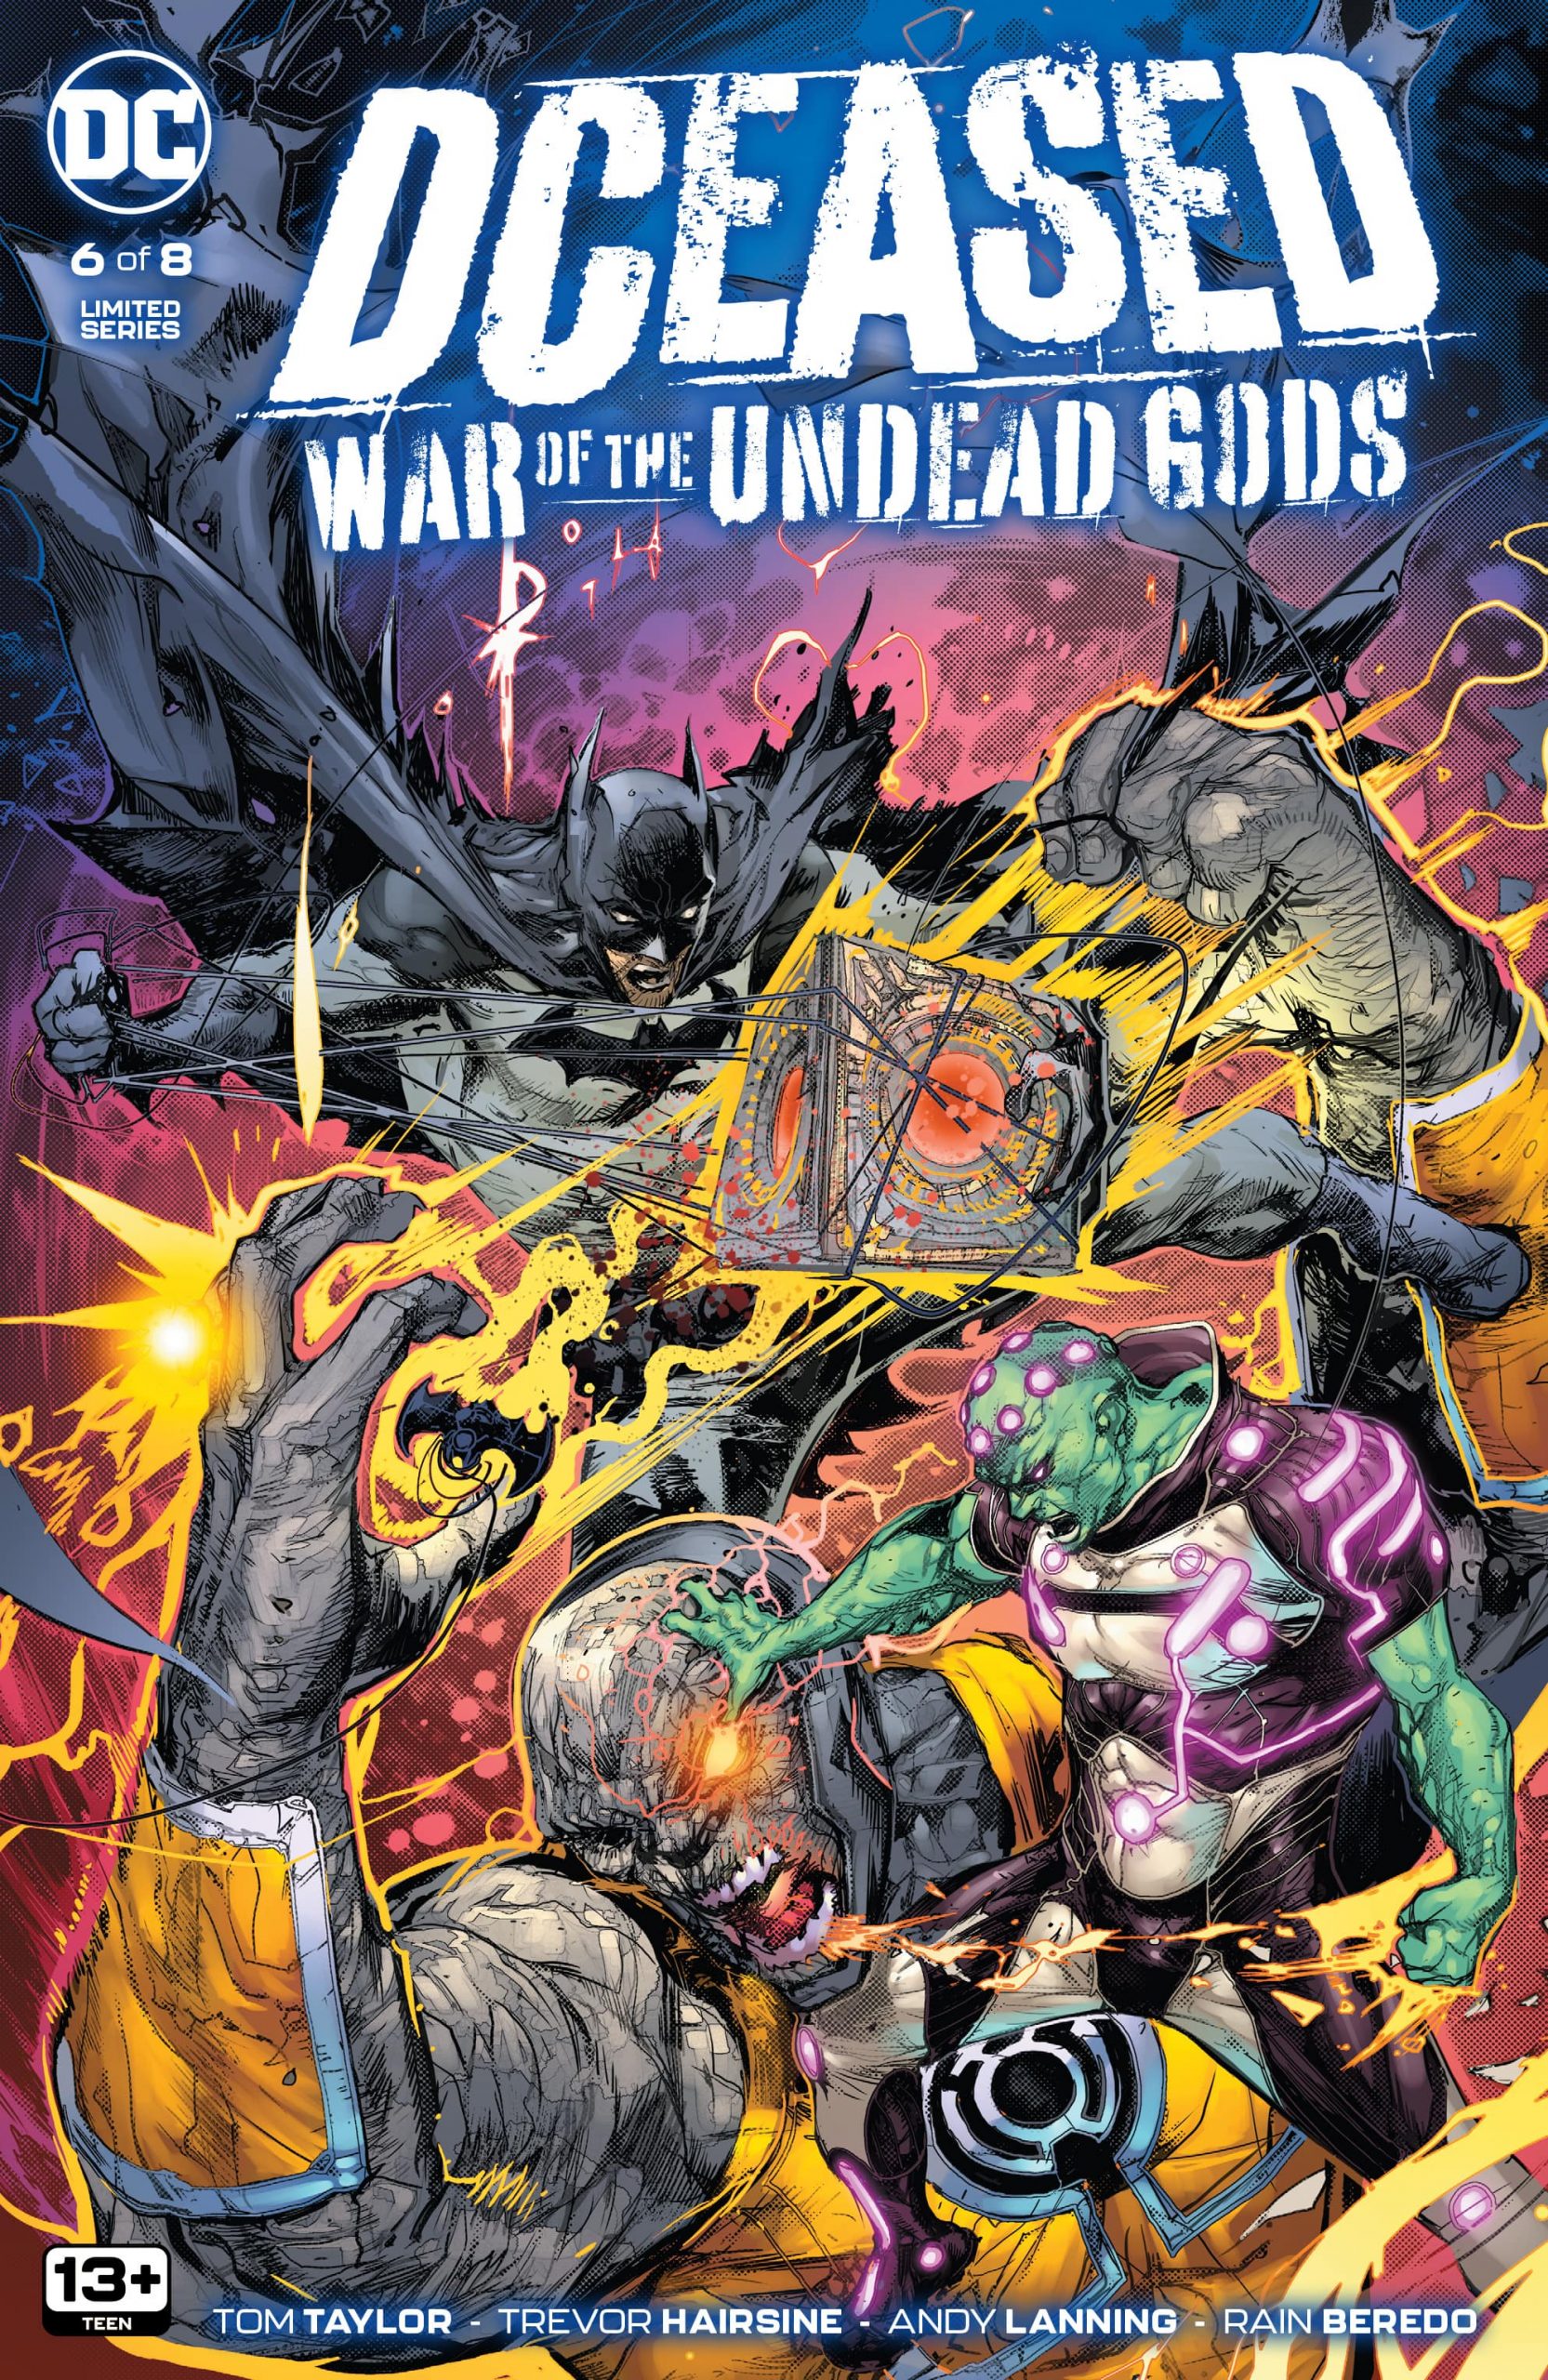 DC Preview: DCeased: War of the Undead Gods #6